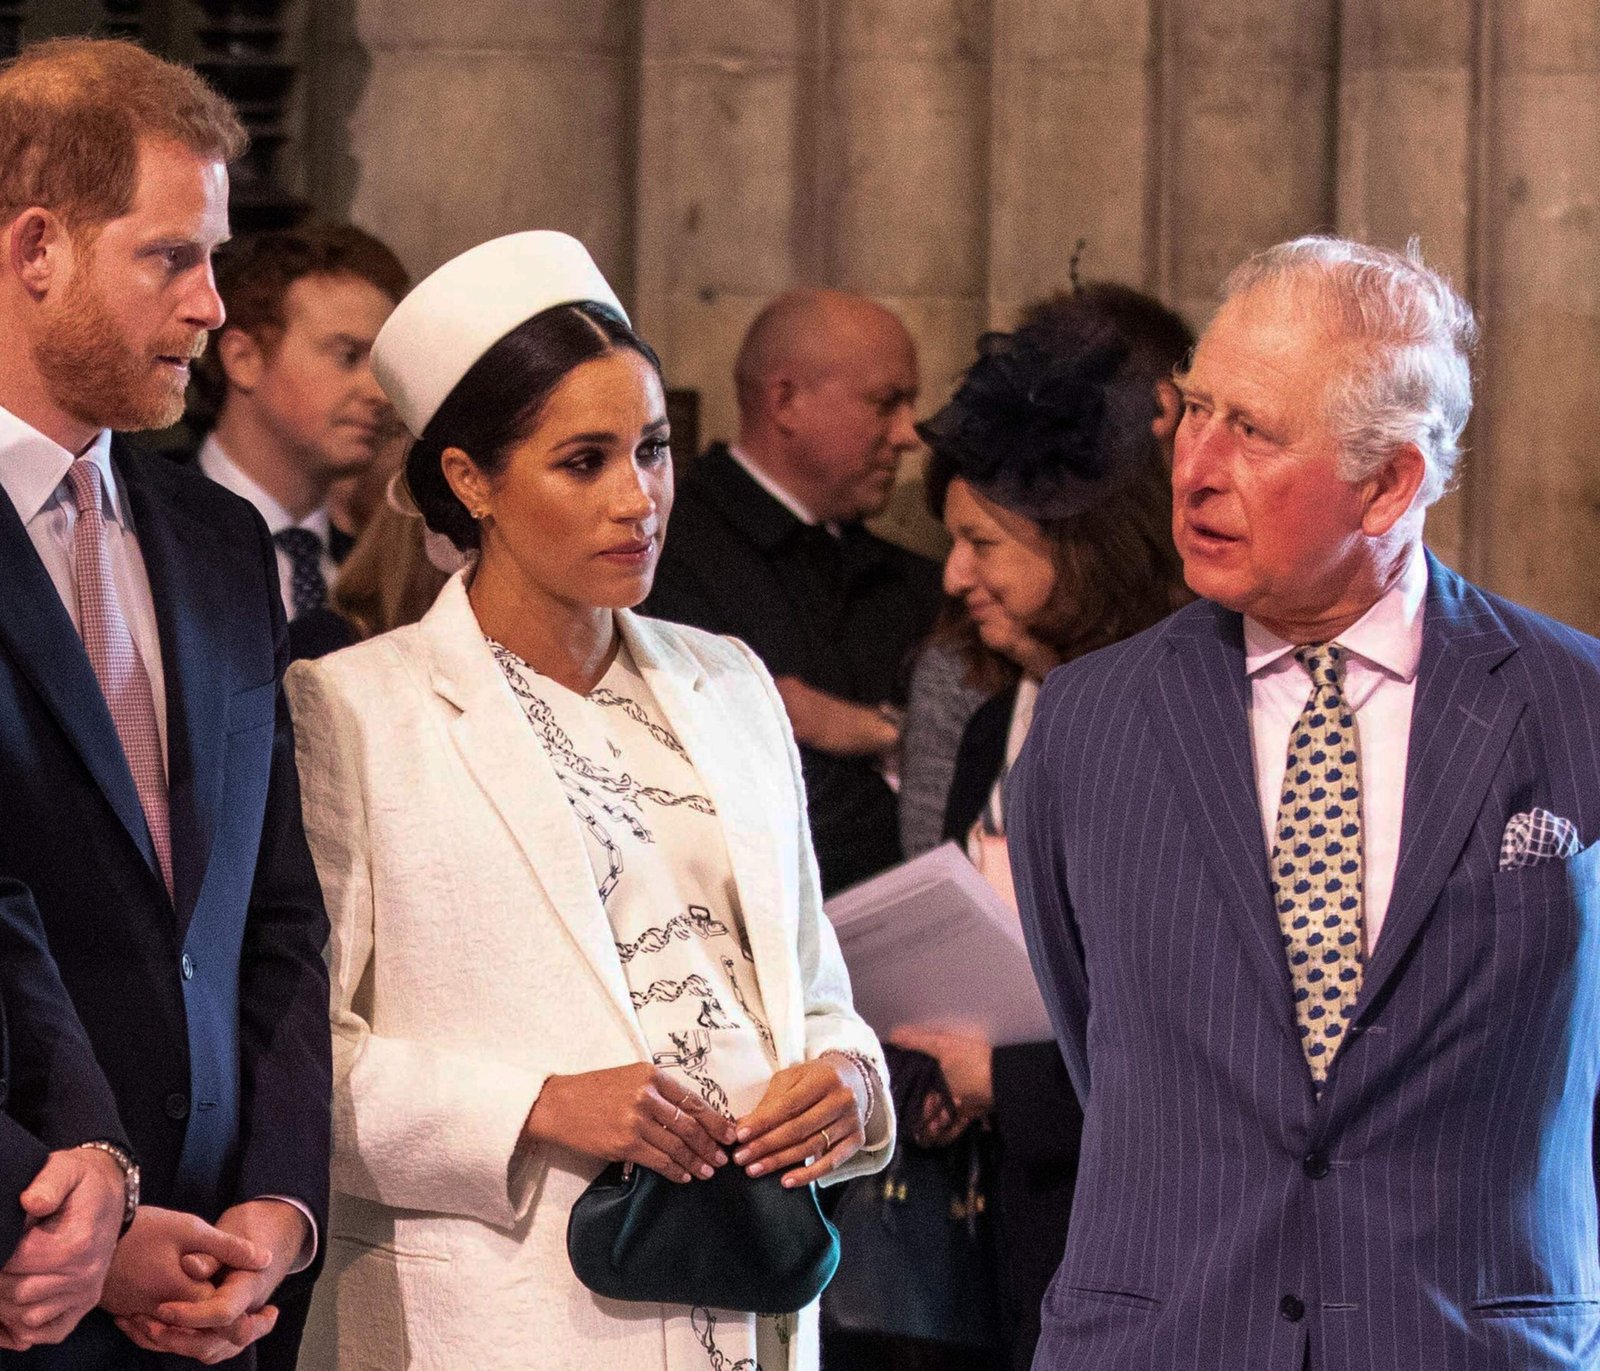 The annual report from Buckingham Palace: Prince Harry and Meghan Markle have deceived the public, this is the truth